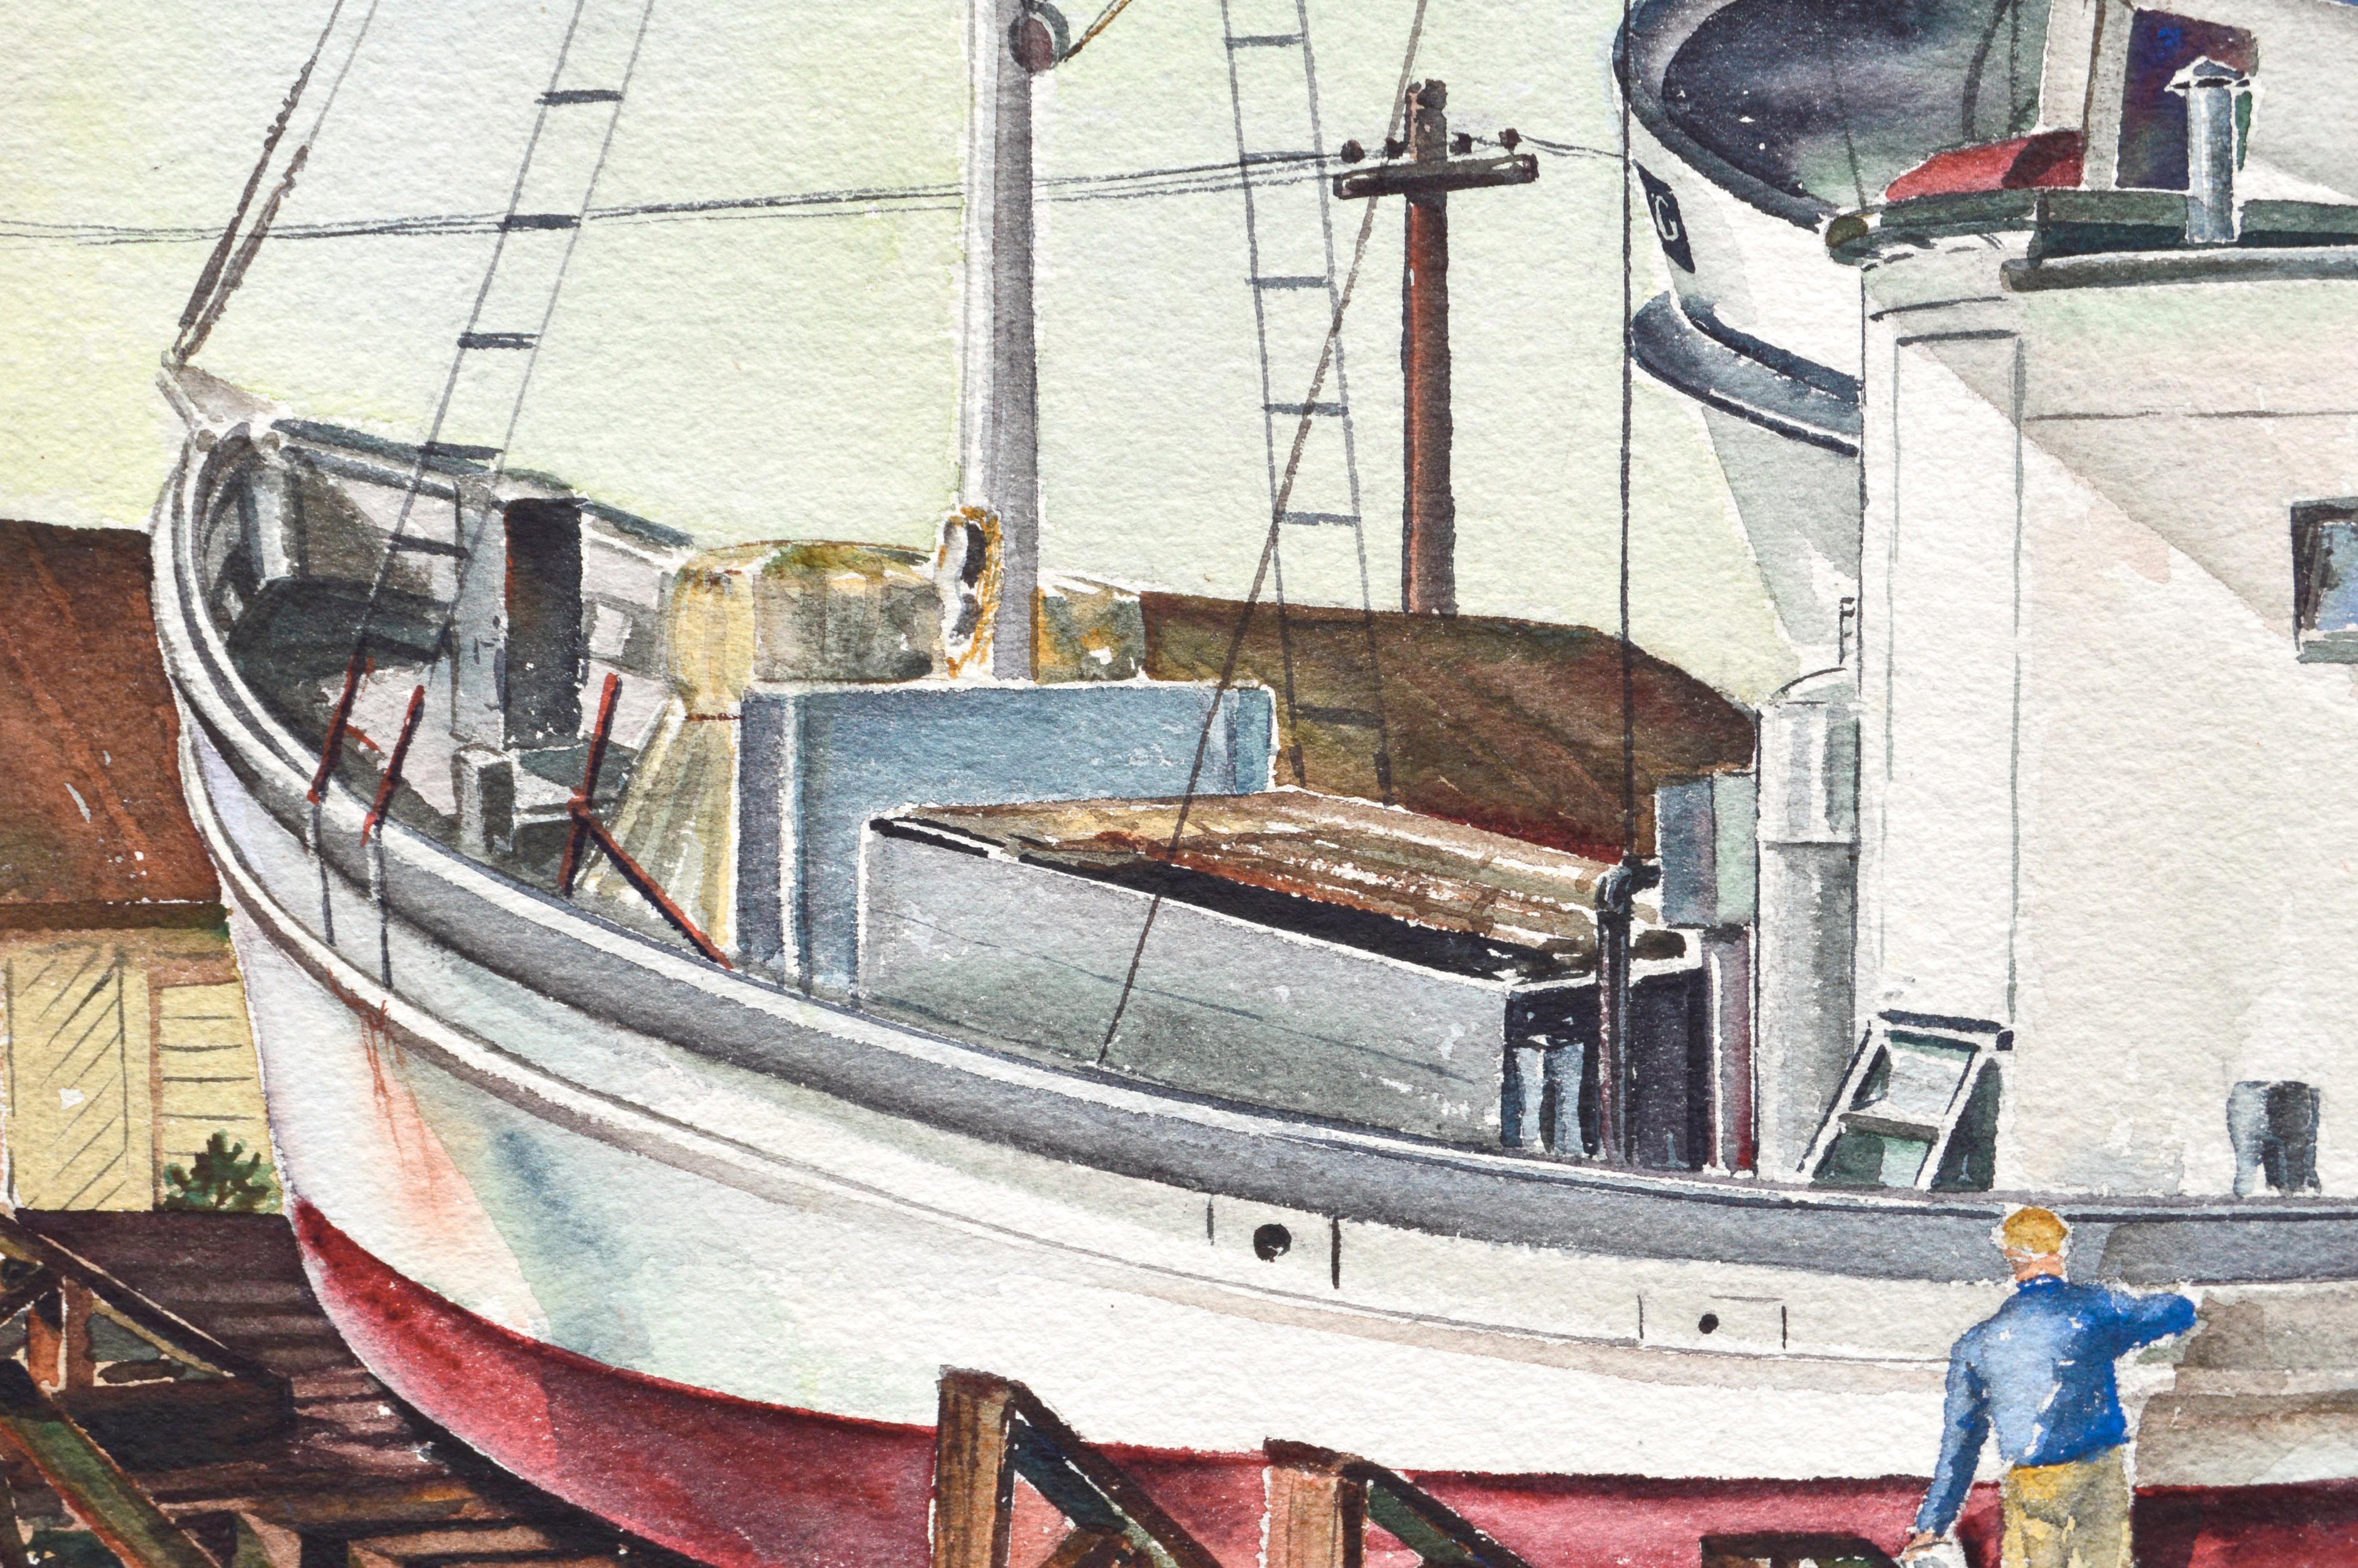 Highly detailed watercolor of a boat in drydock being refurbished, by Joe Yeager (American, 20th Century). Yeager's skills as a technical artist are prominently on display in the rigging and mechanical aspects of the boats. Signed and dated by the